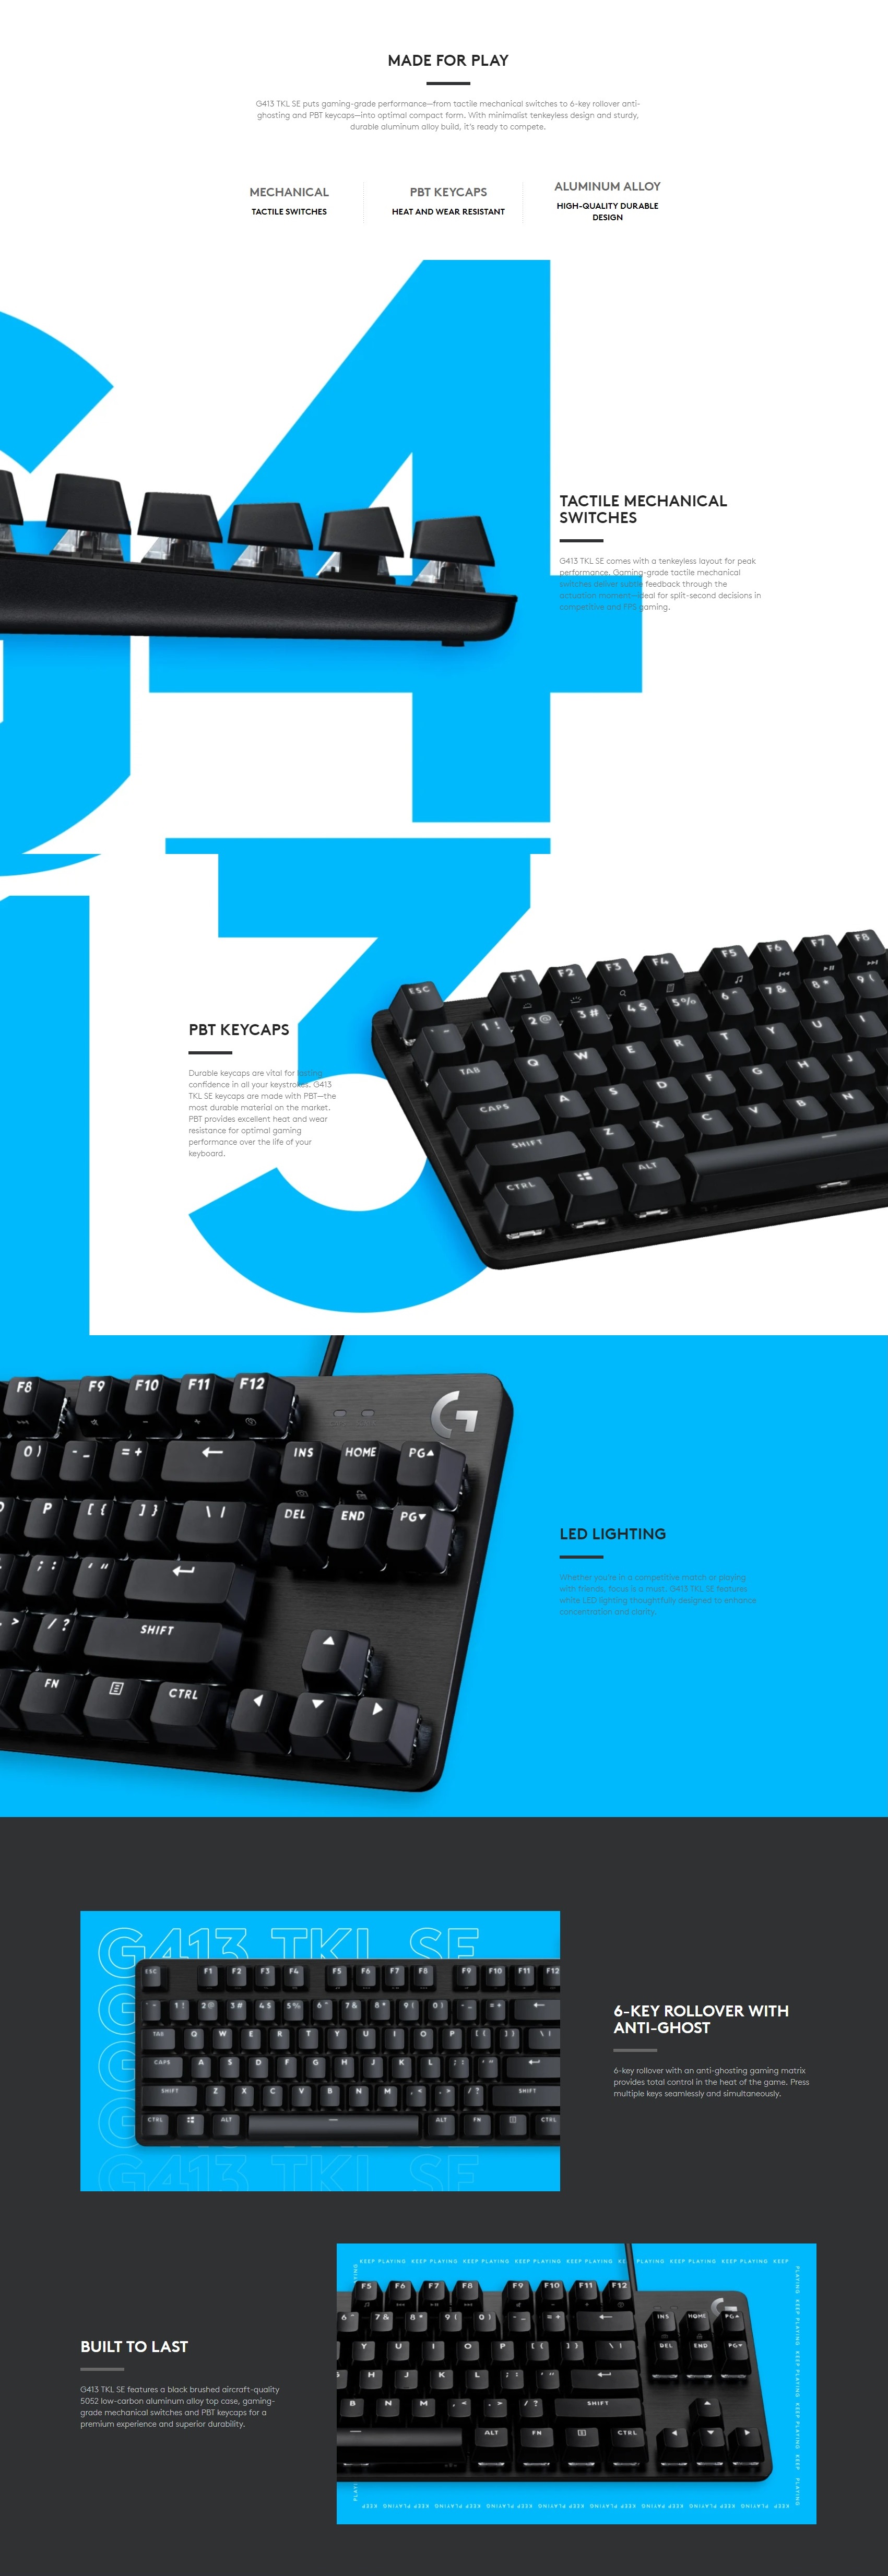 A large marketing image providing additional information about the product Logitech G413 TKL SE Mechanical Gaming Keyboard Tactile - Additional alt info not provided